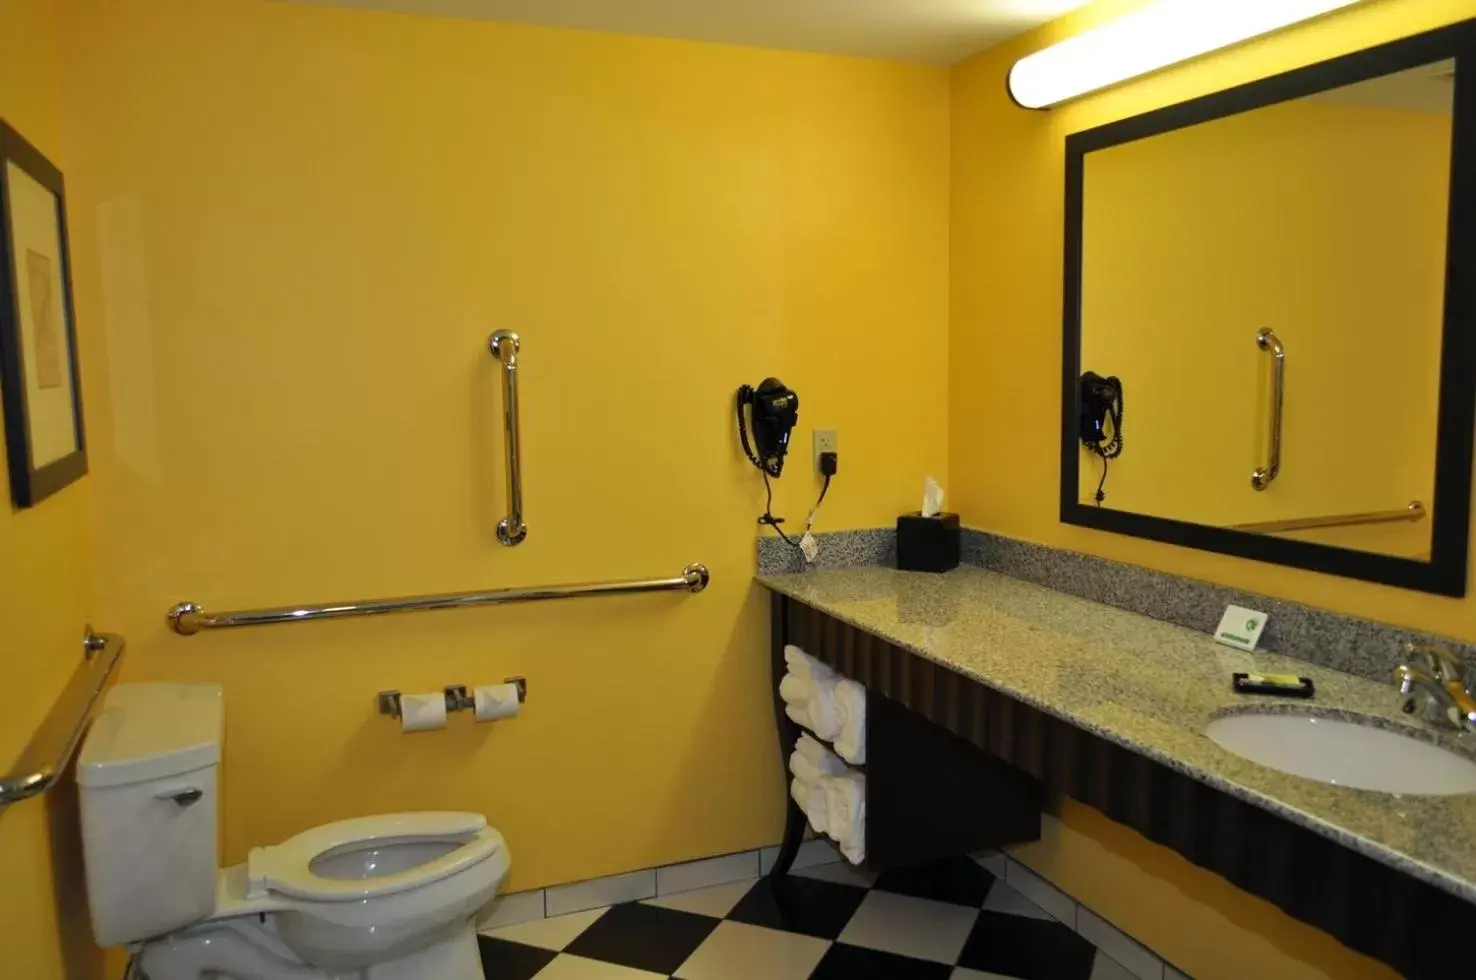 Bathroom in Evangeline Downs Hotel, Ascend Hotel Collection